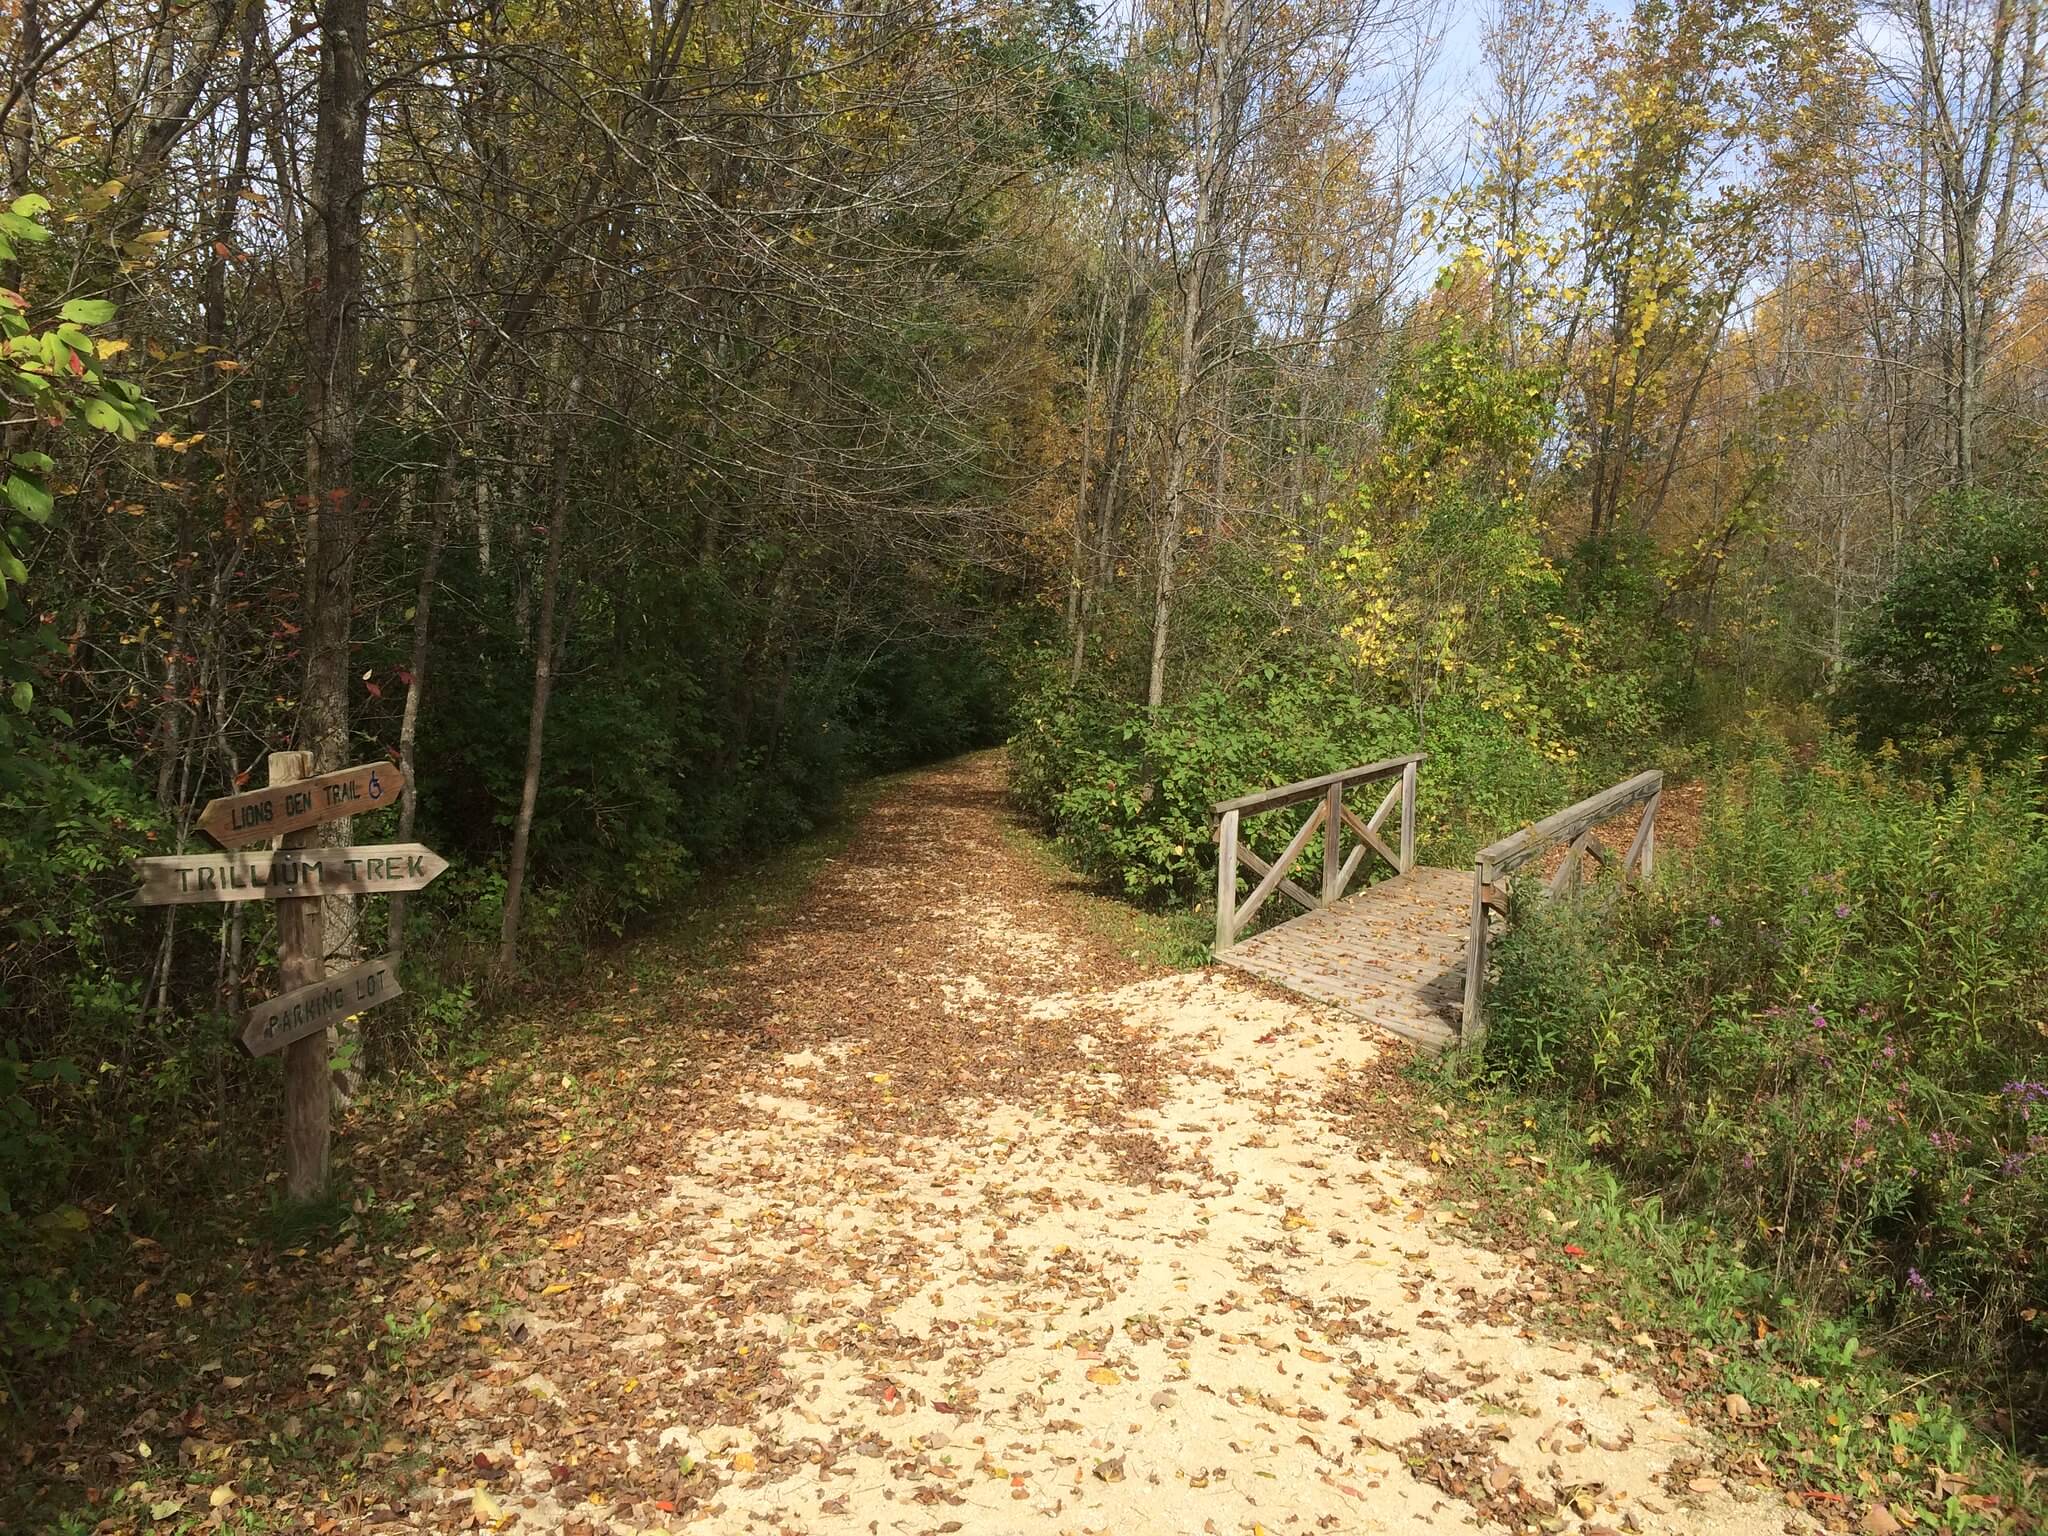 Knowles-Nelson Stewardship Program - a gravel trail and small wooden boardwalk in Lion's Den Gorge Nature Preserve